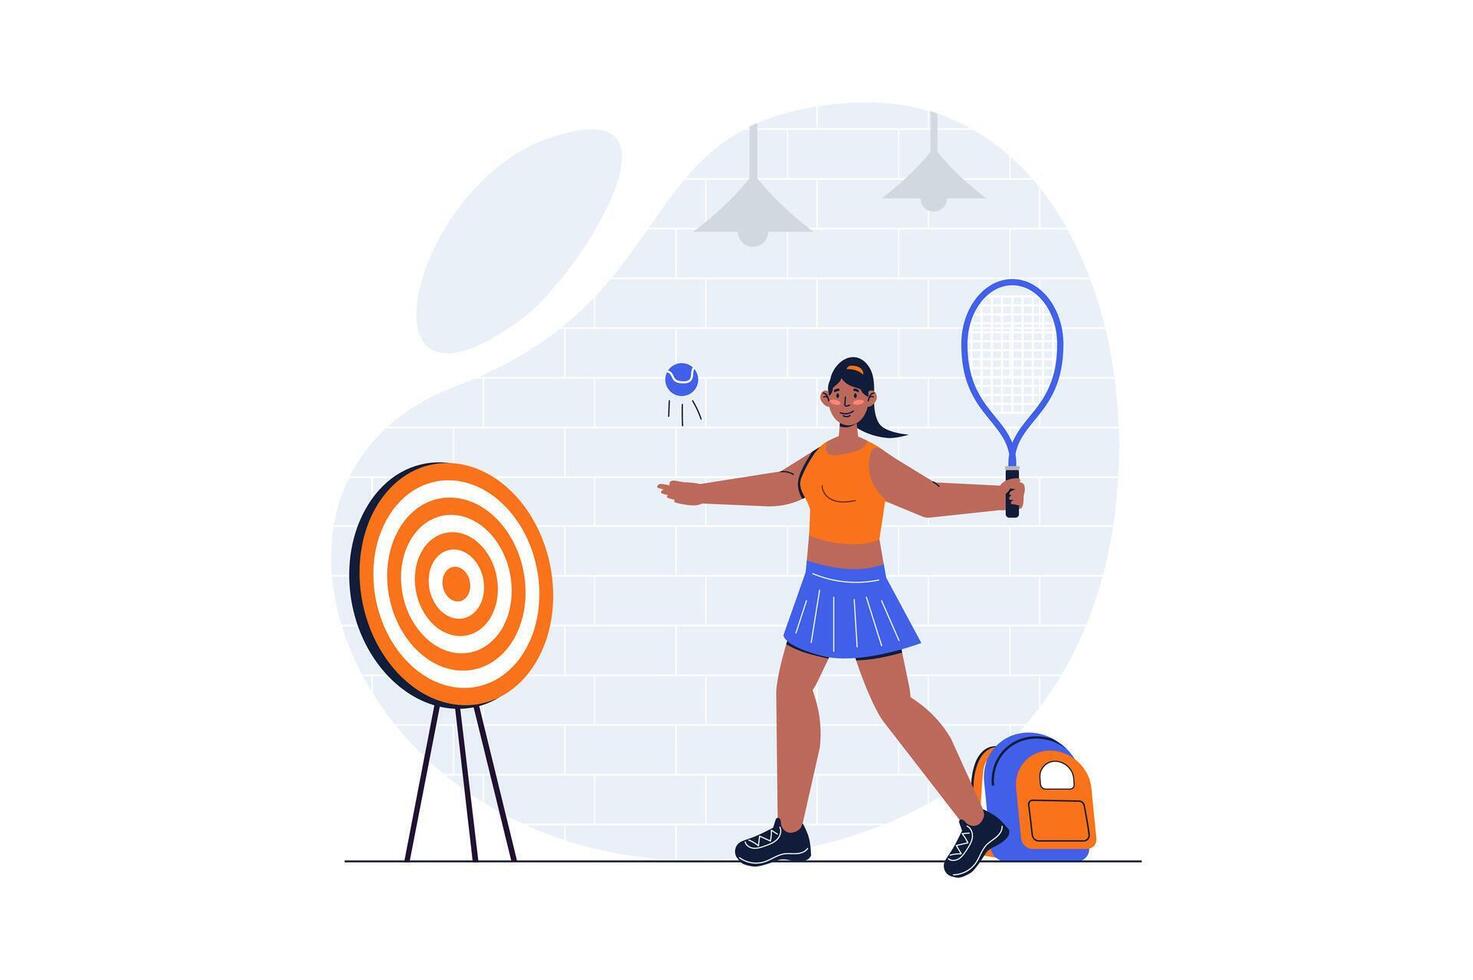 Sport training web concept with character scene. Woman with racket and ball playing tennis for competition. People situation in flat design. Vector illustration for social media marketing material.